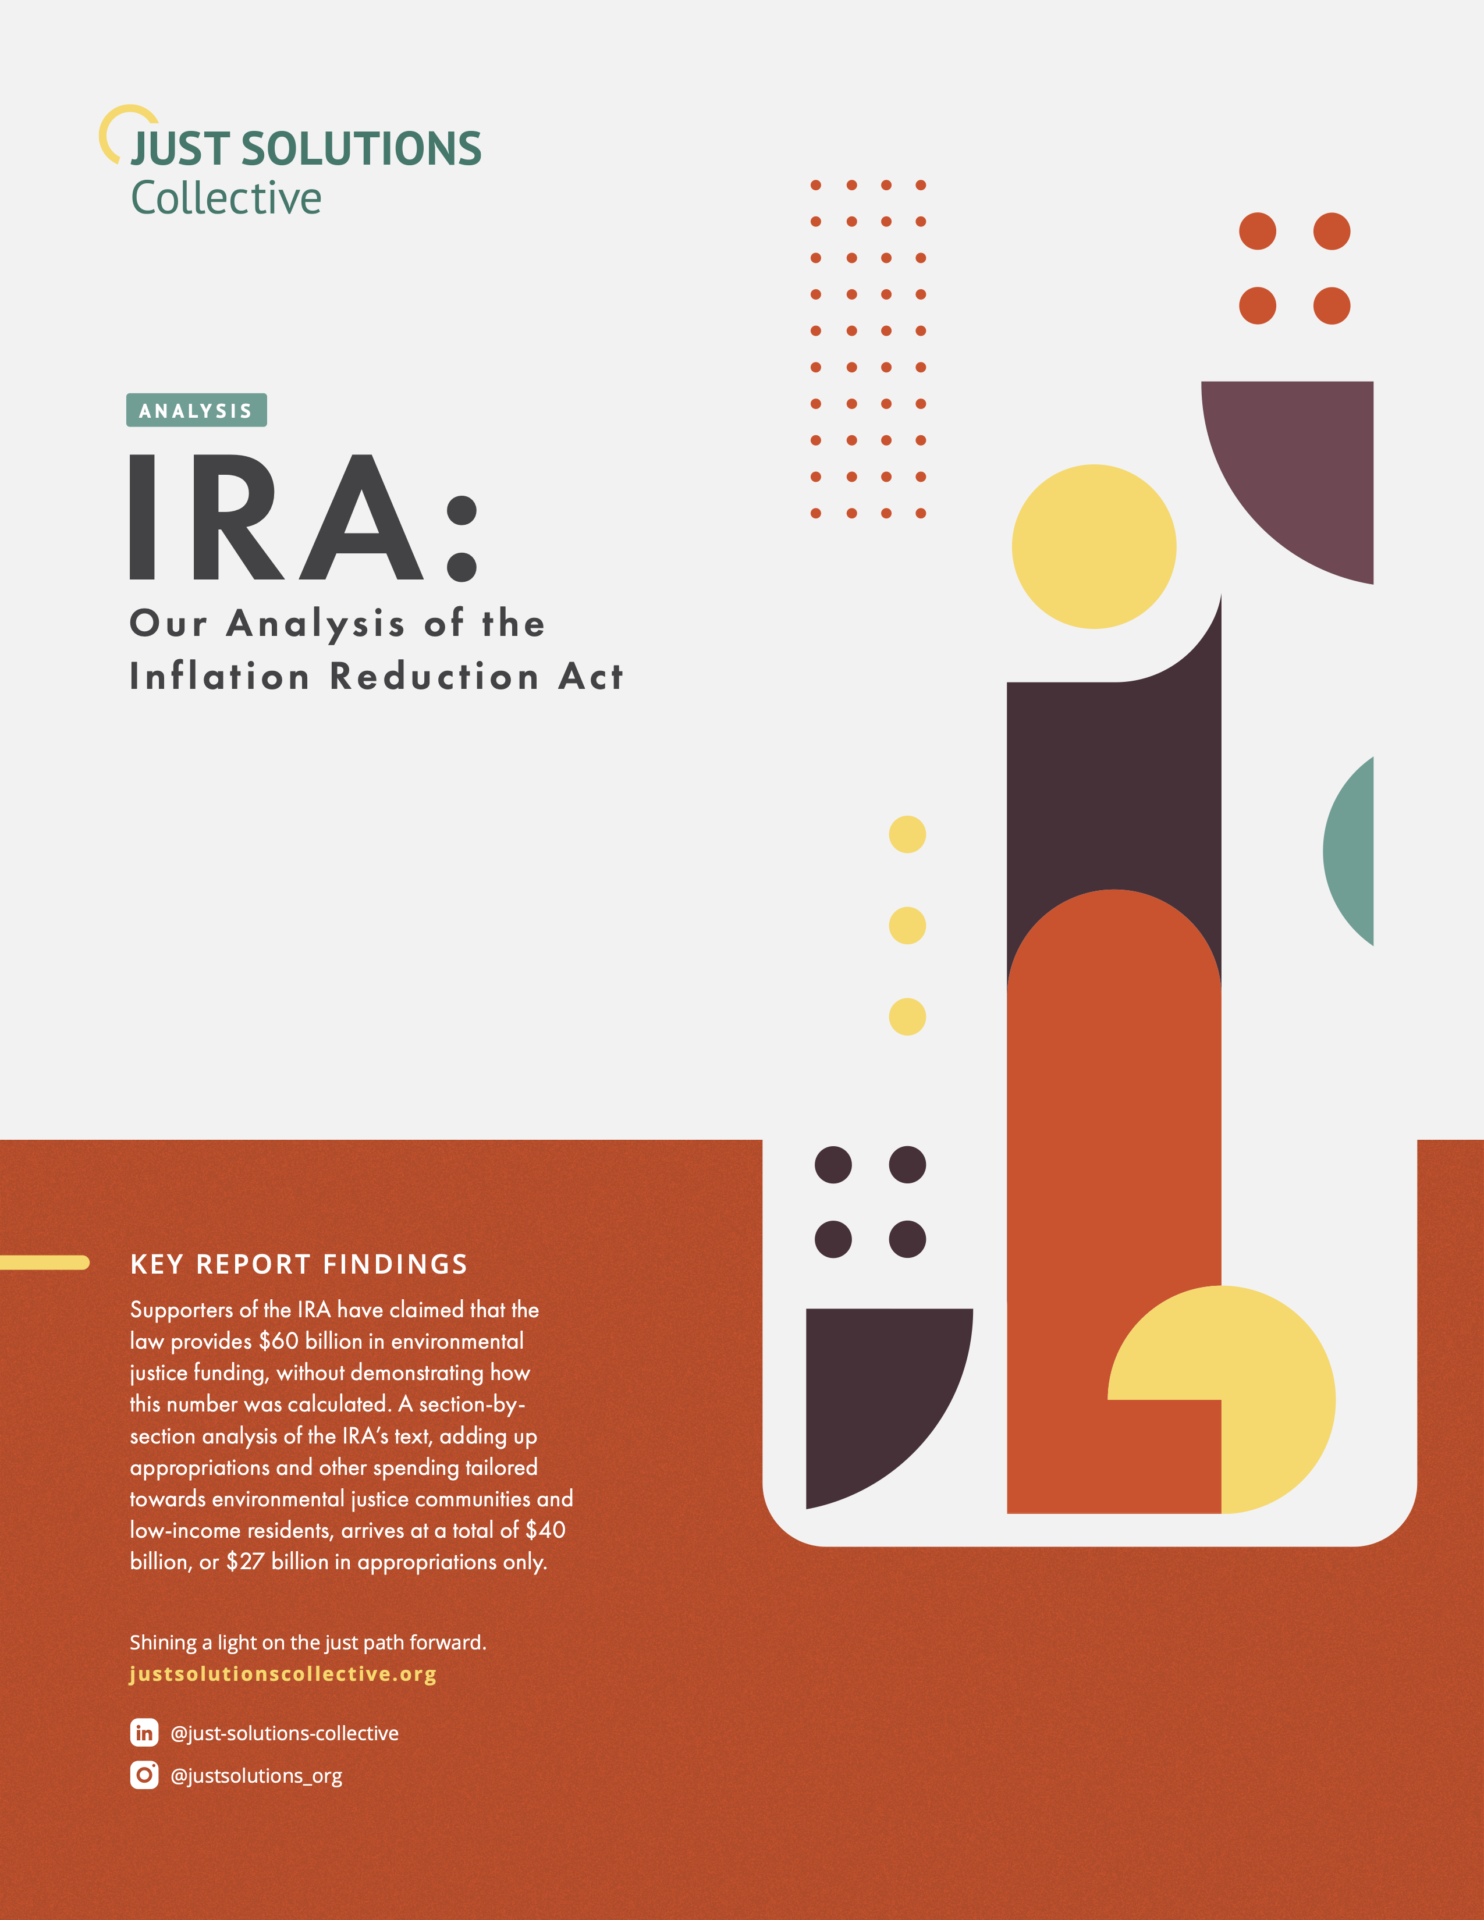 IRA: Our Analysis of the Inflation Reduction Act